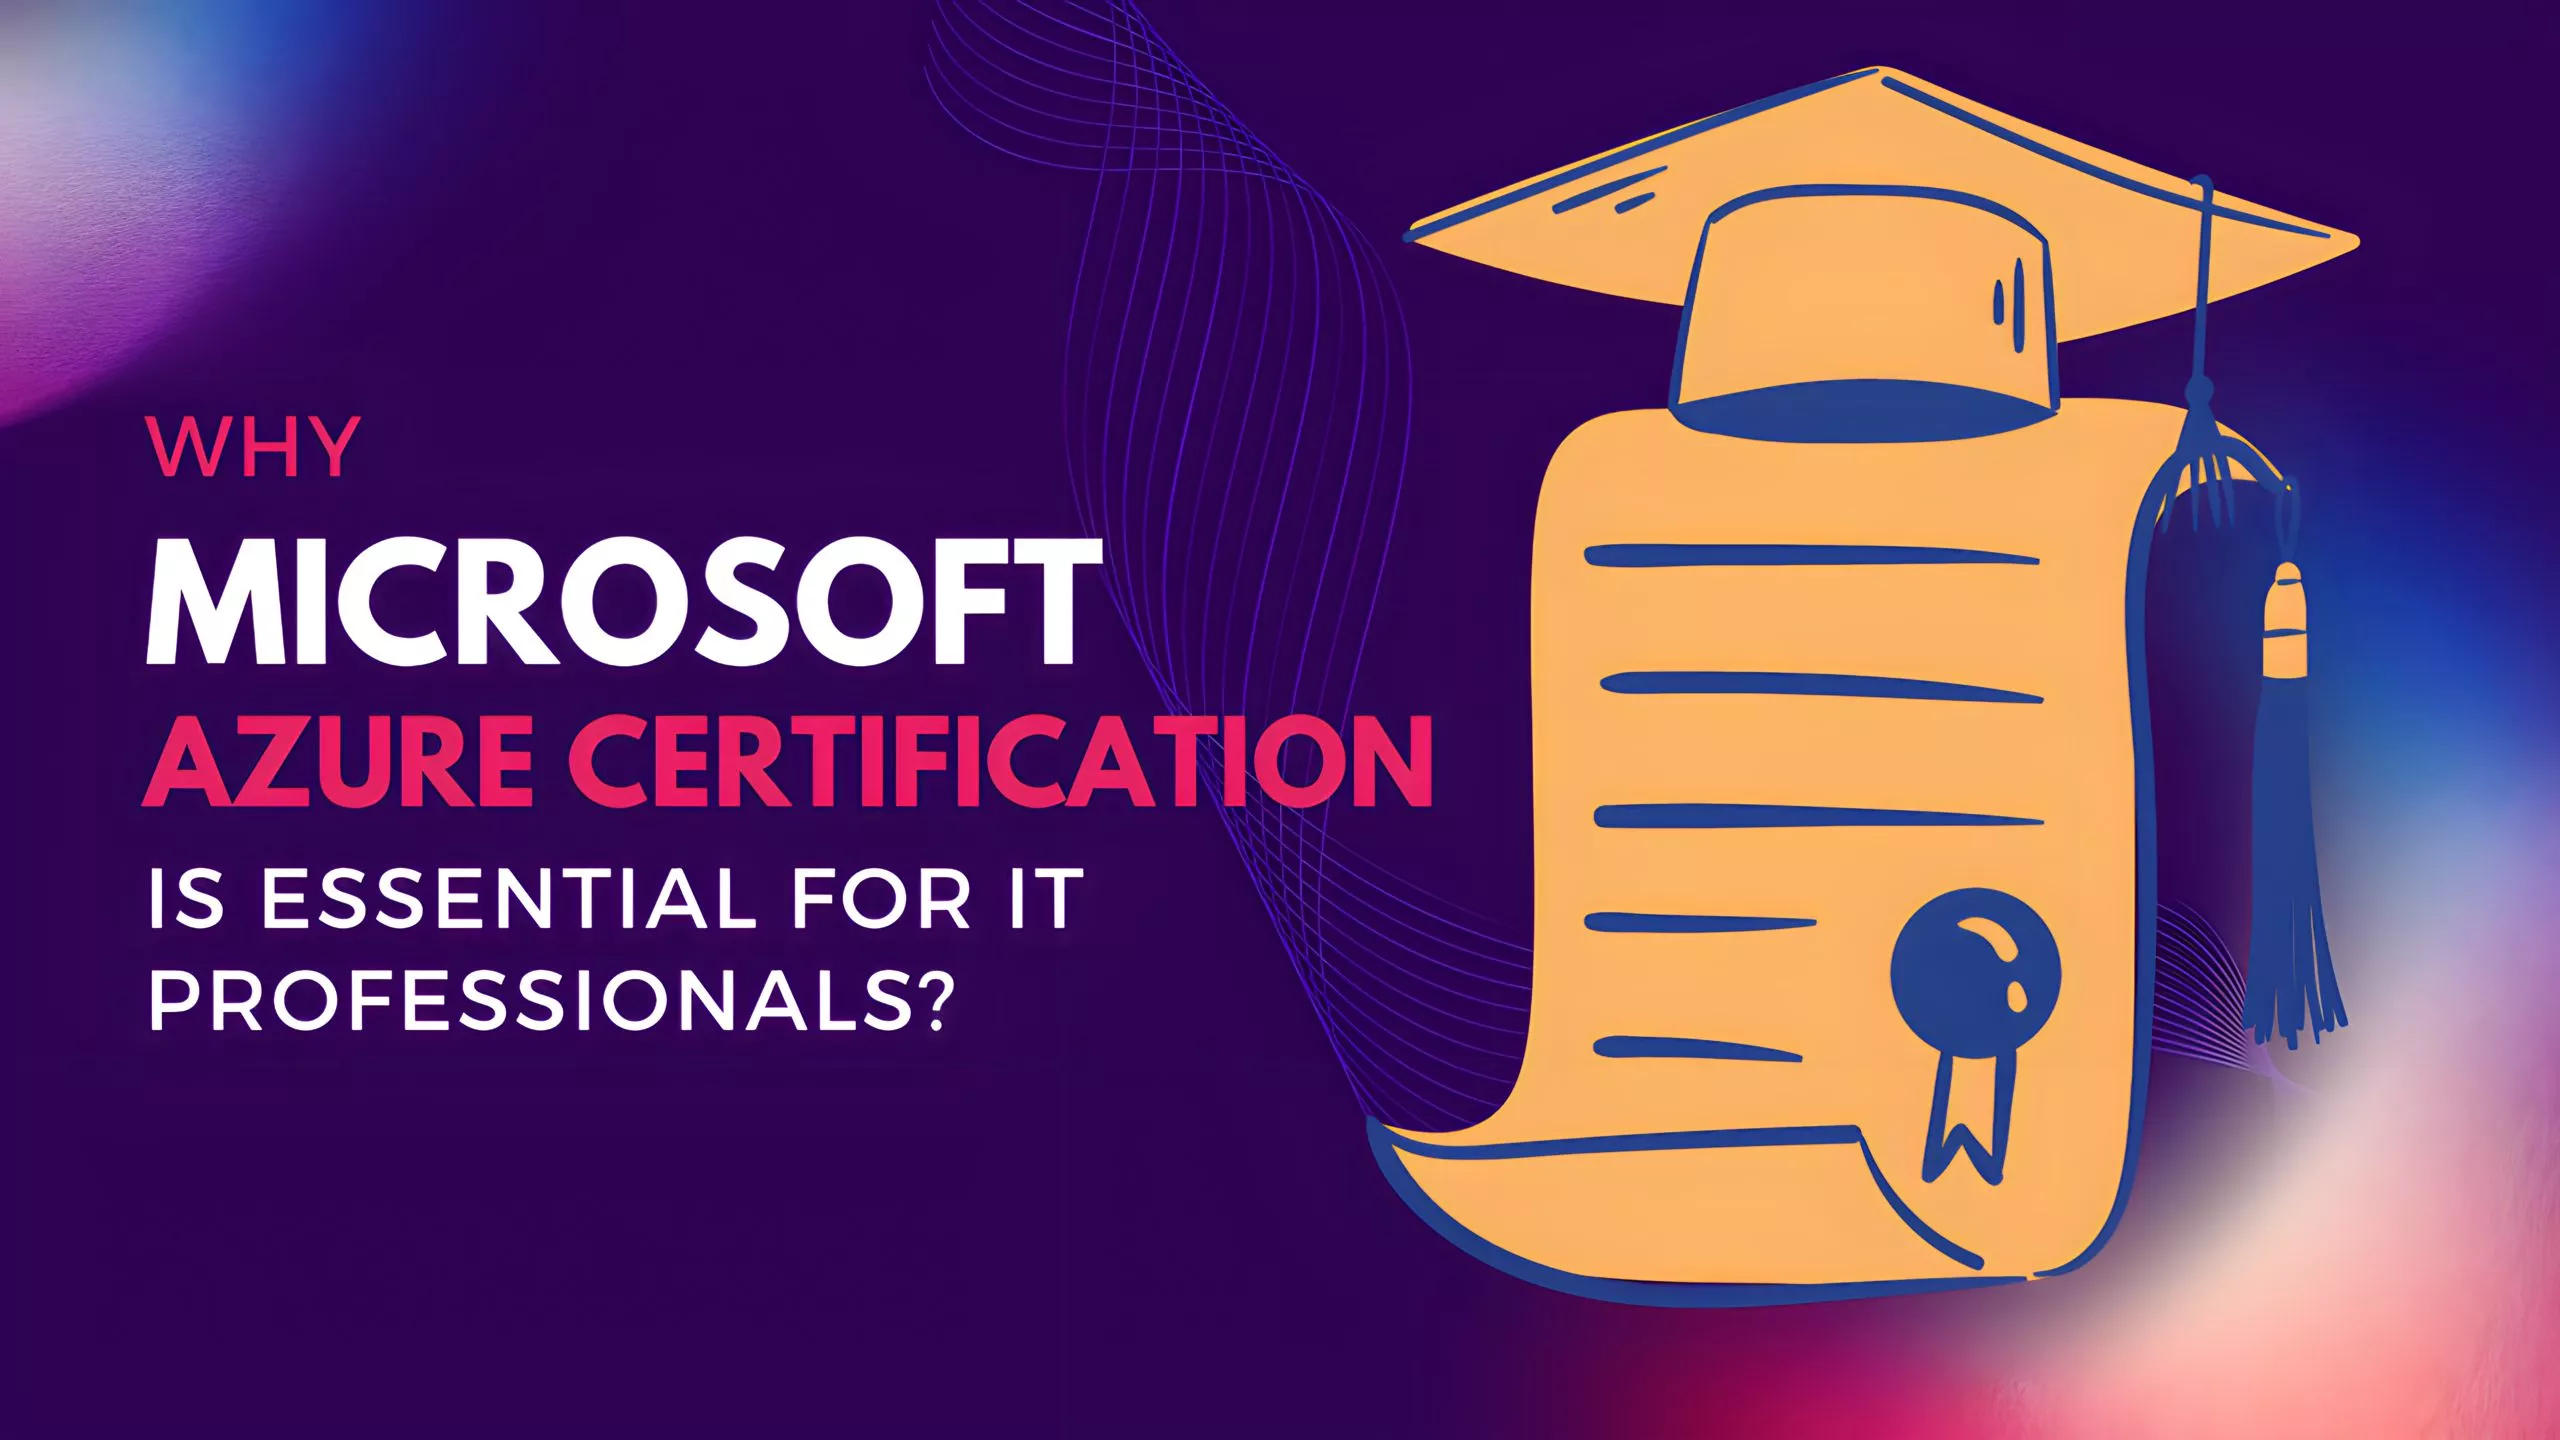 Why Microsoft Azure Certification is Essential for IT Professionals